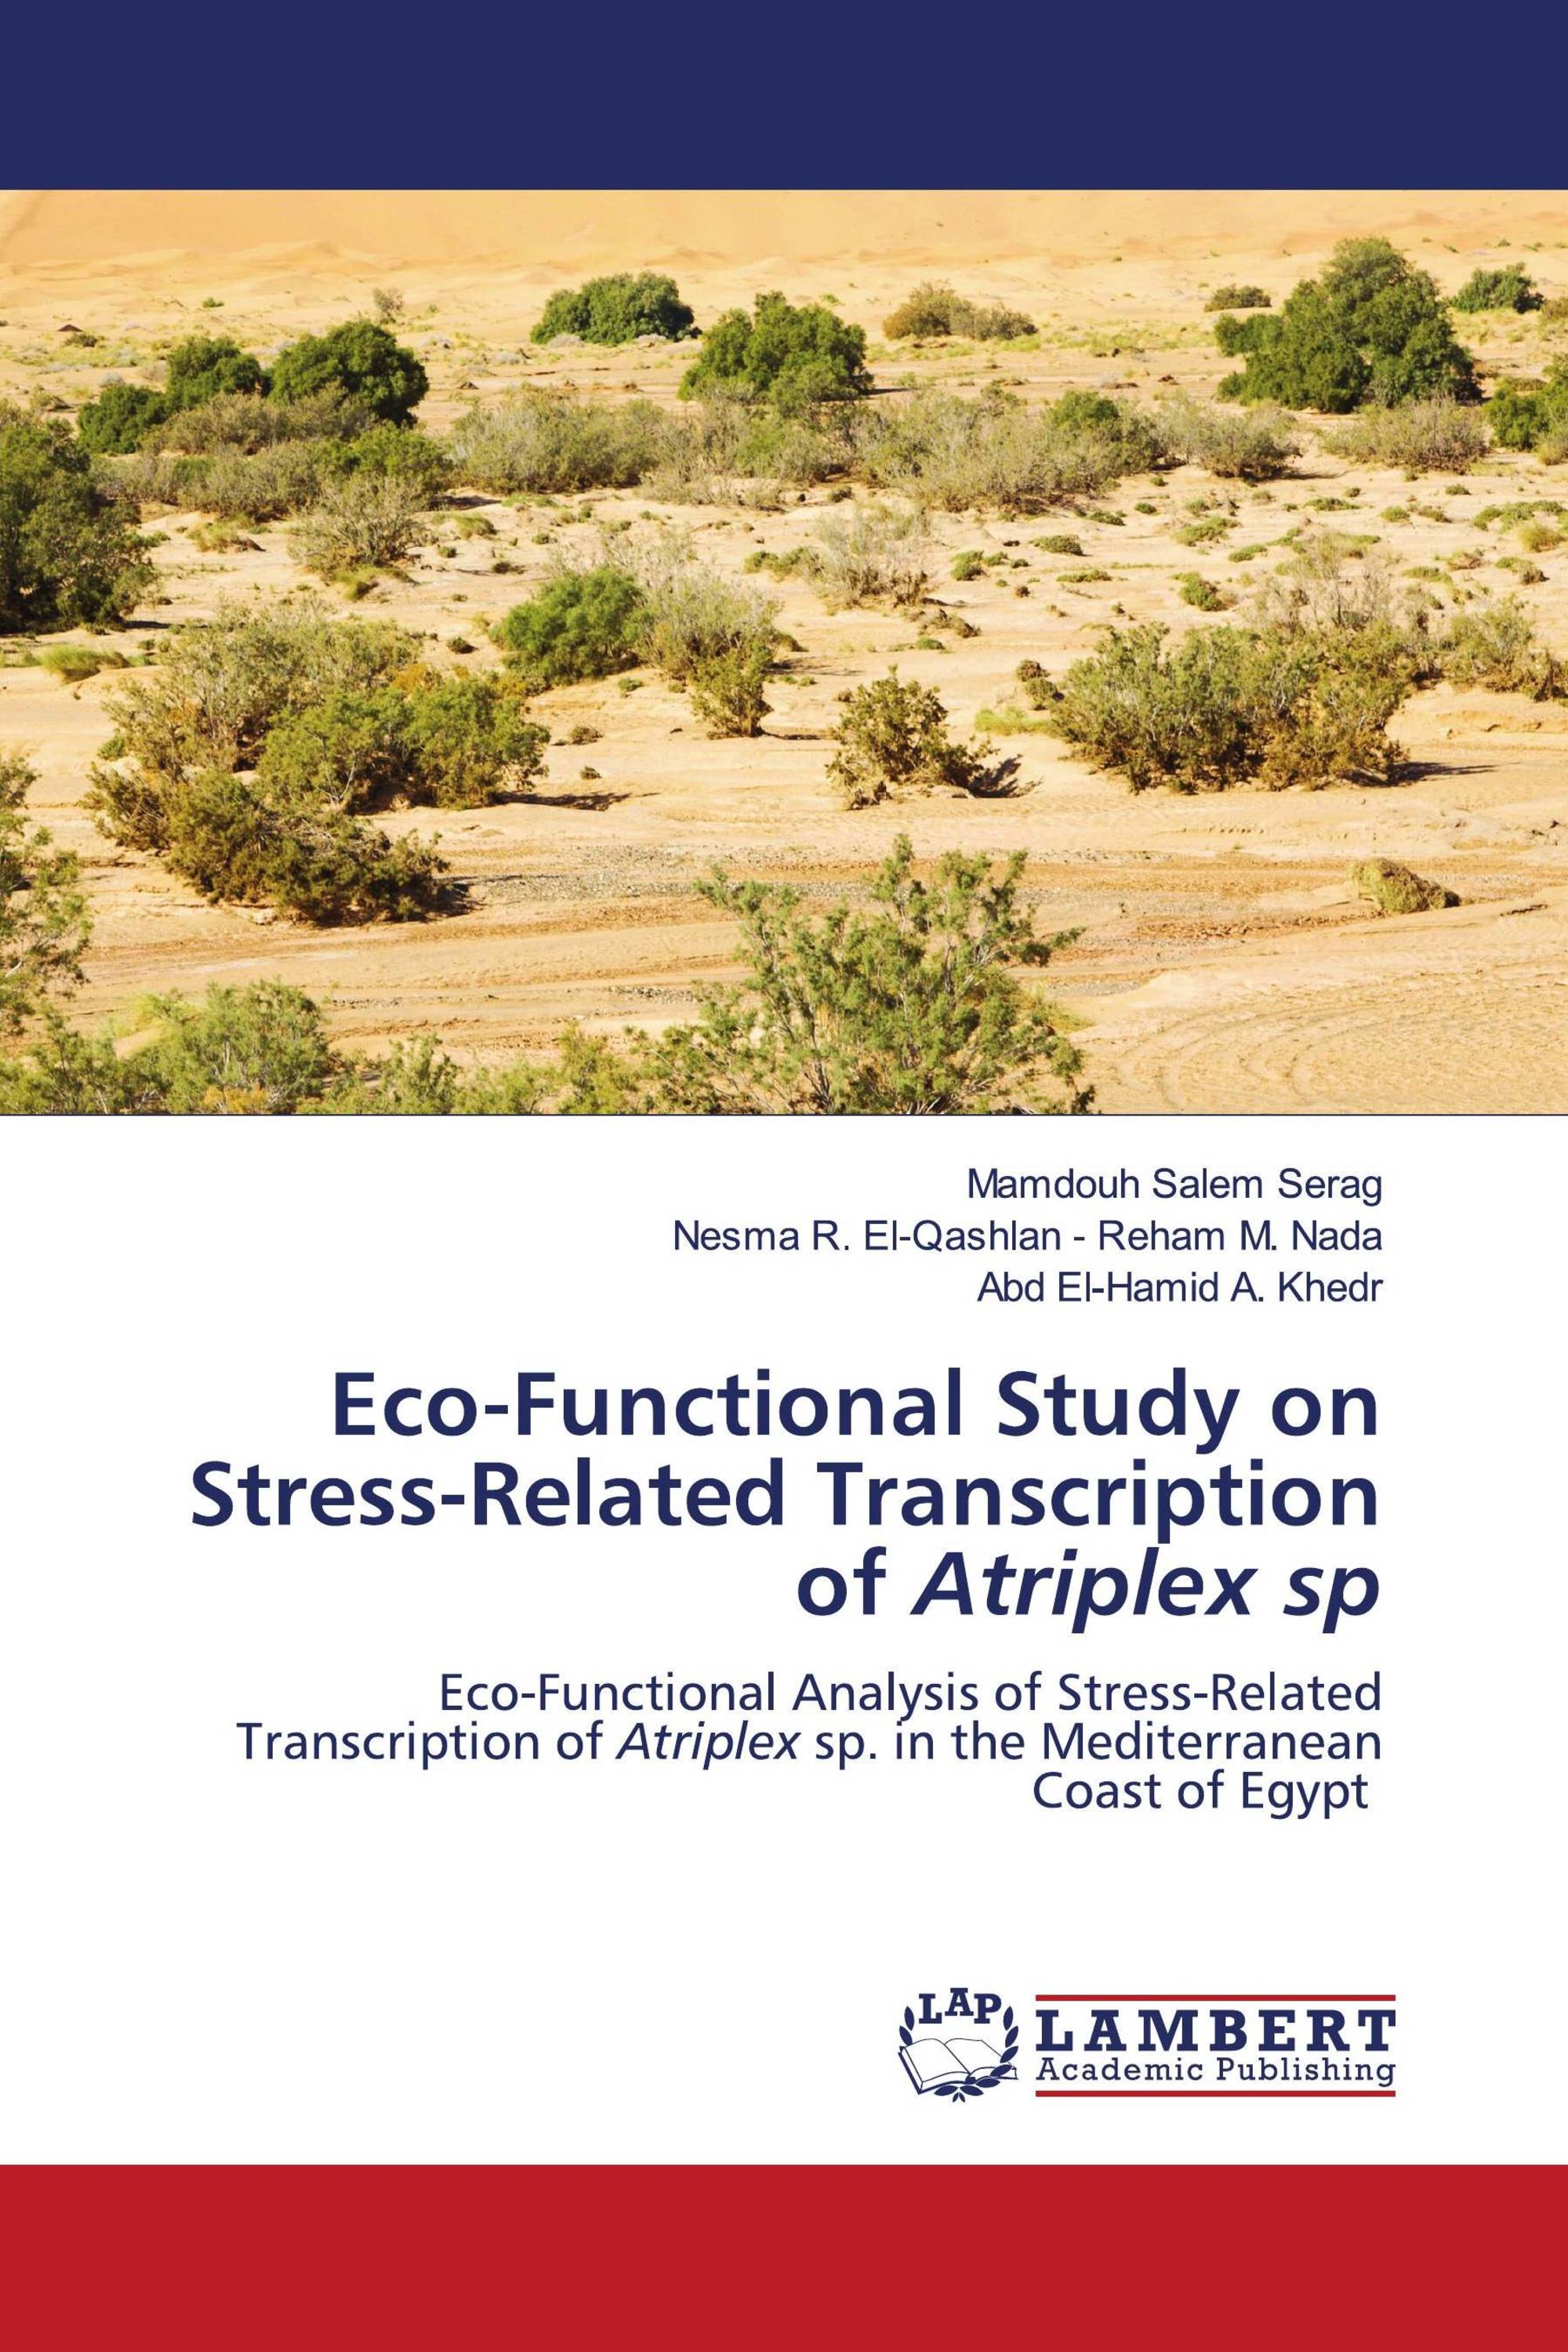 Eco-Functional Study on Stress-Related Transcription of Atriplex sp